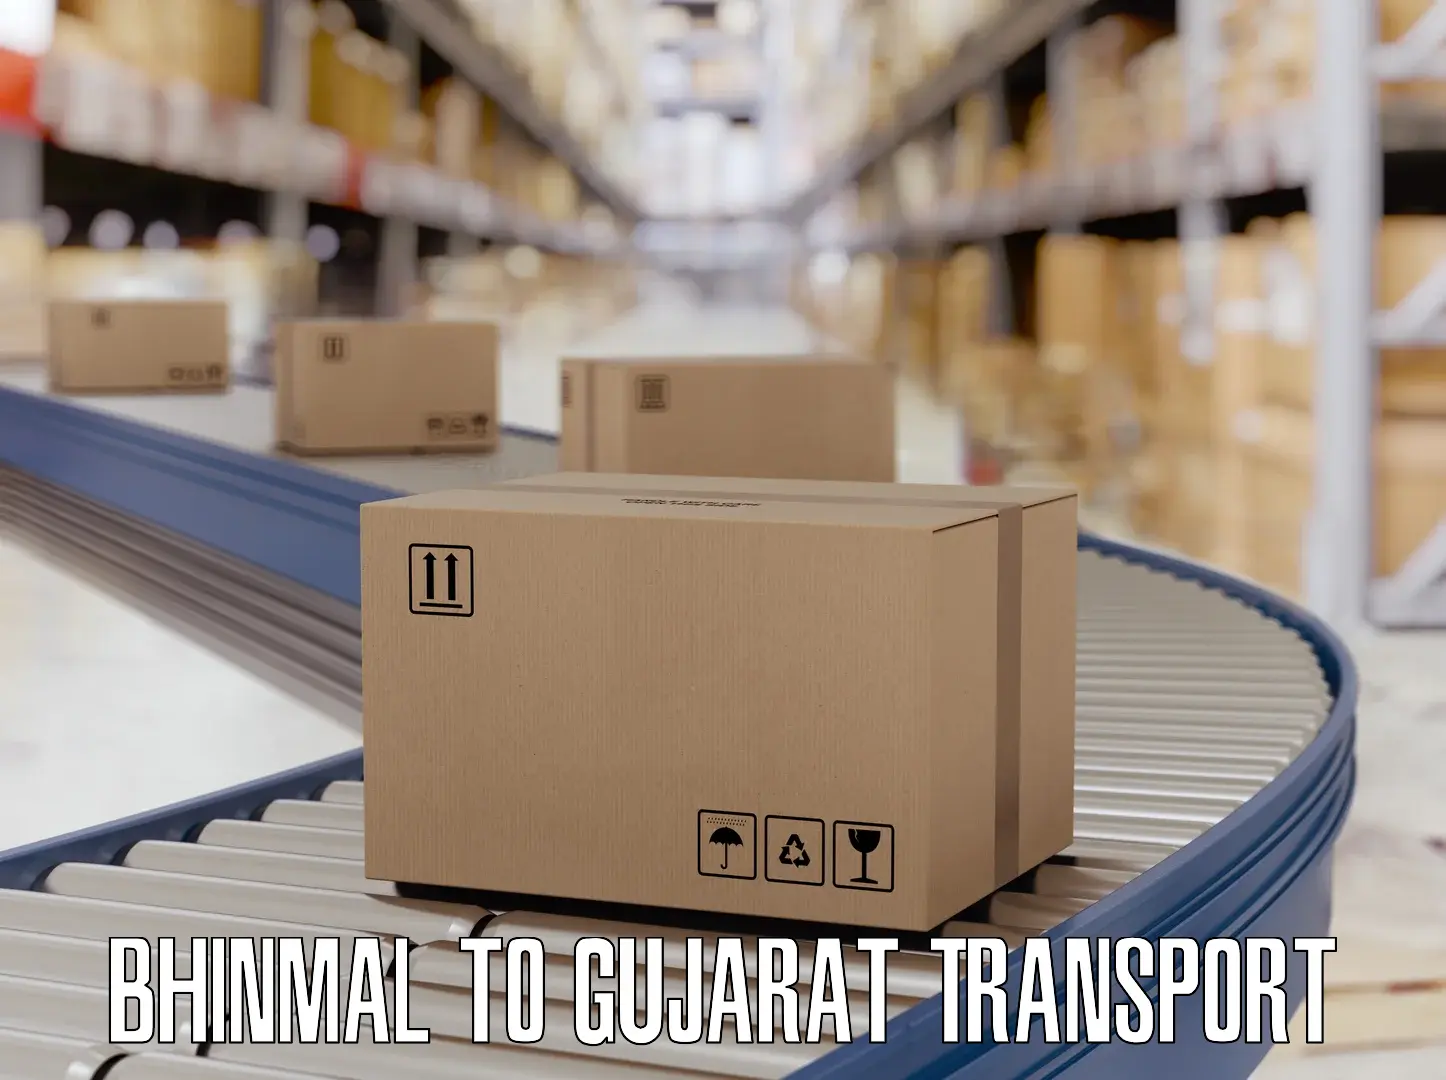 Nearby transport service Bhinmal to Gujarat